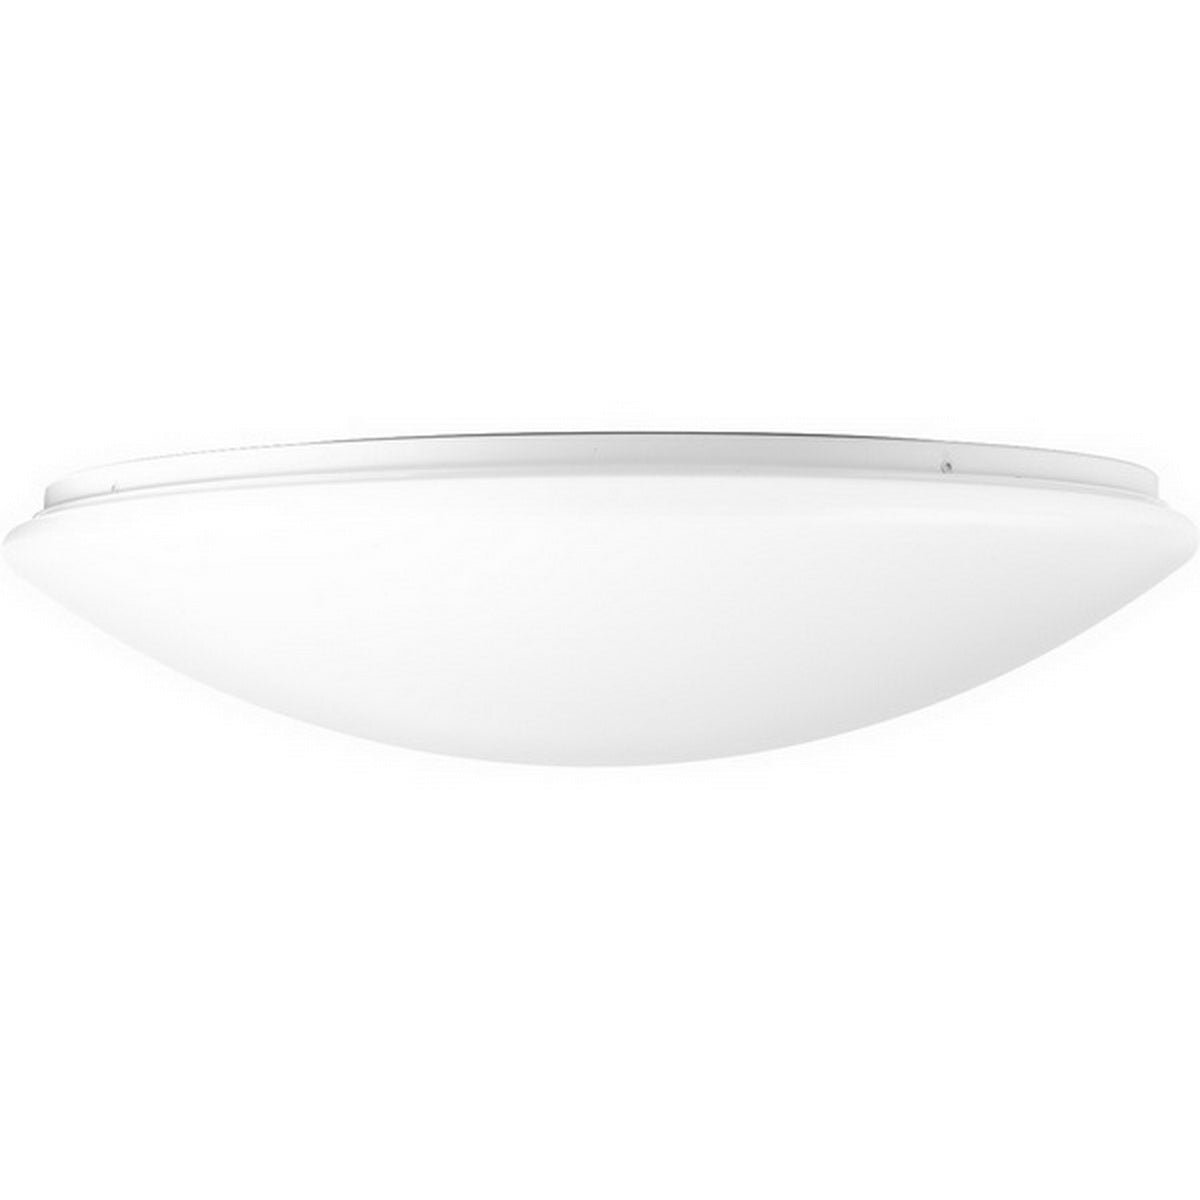 Drums and Clouds 17 in LED Ceiling Puff Light 3000 Lumens 3000K White finish - Bees Lighting